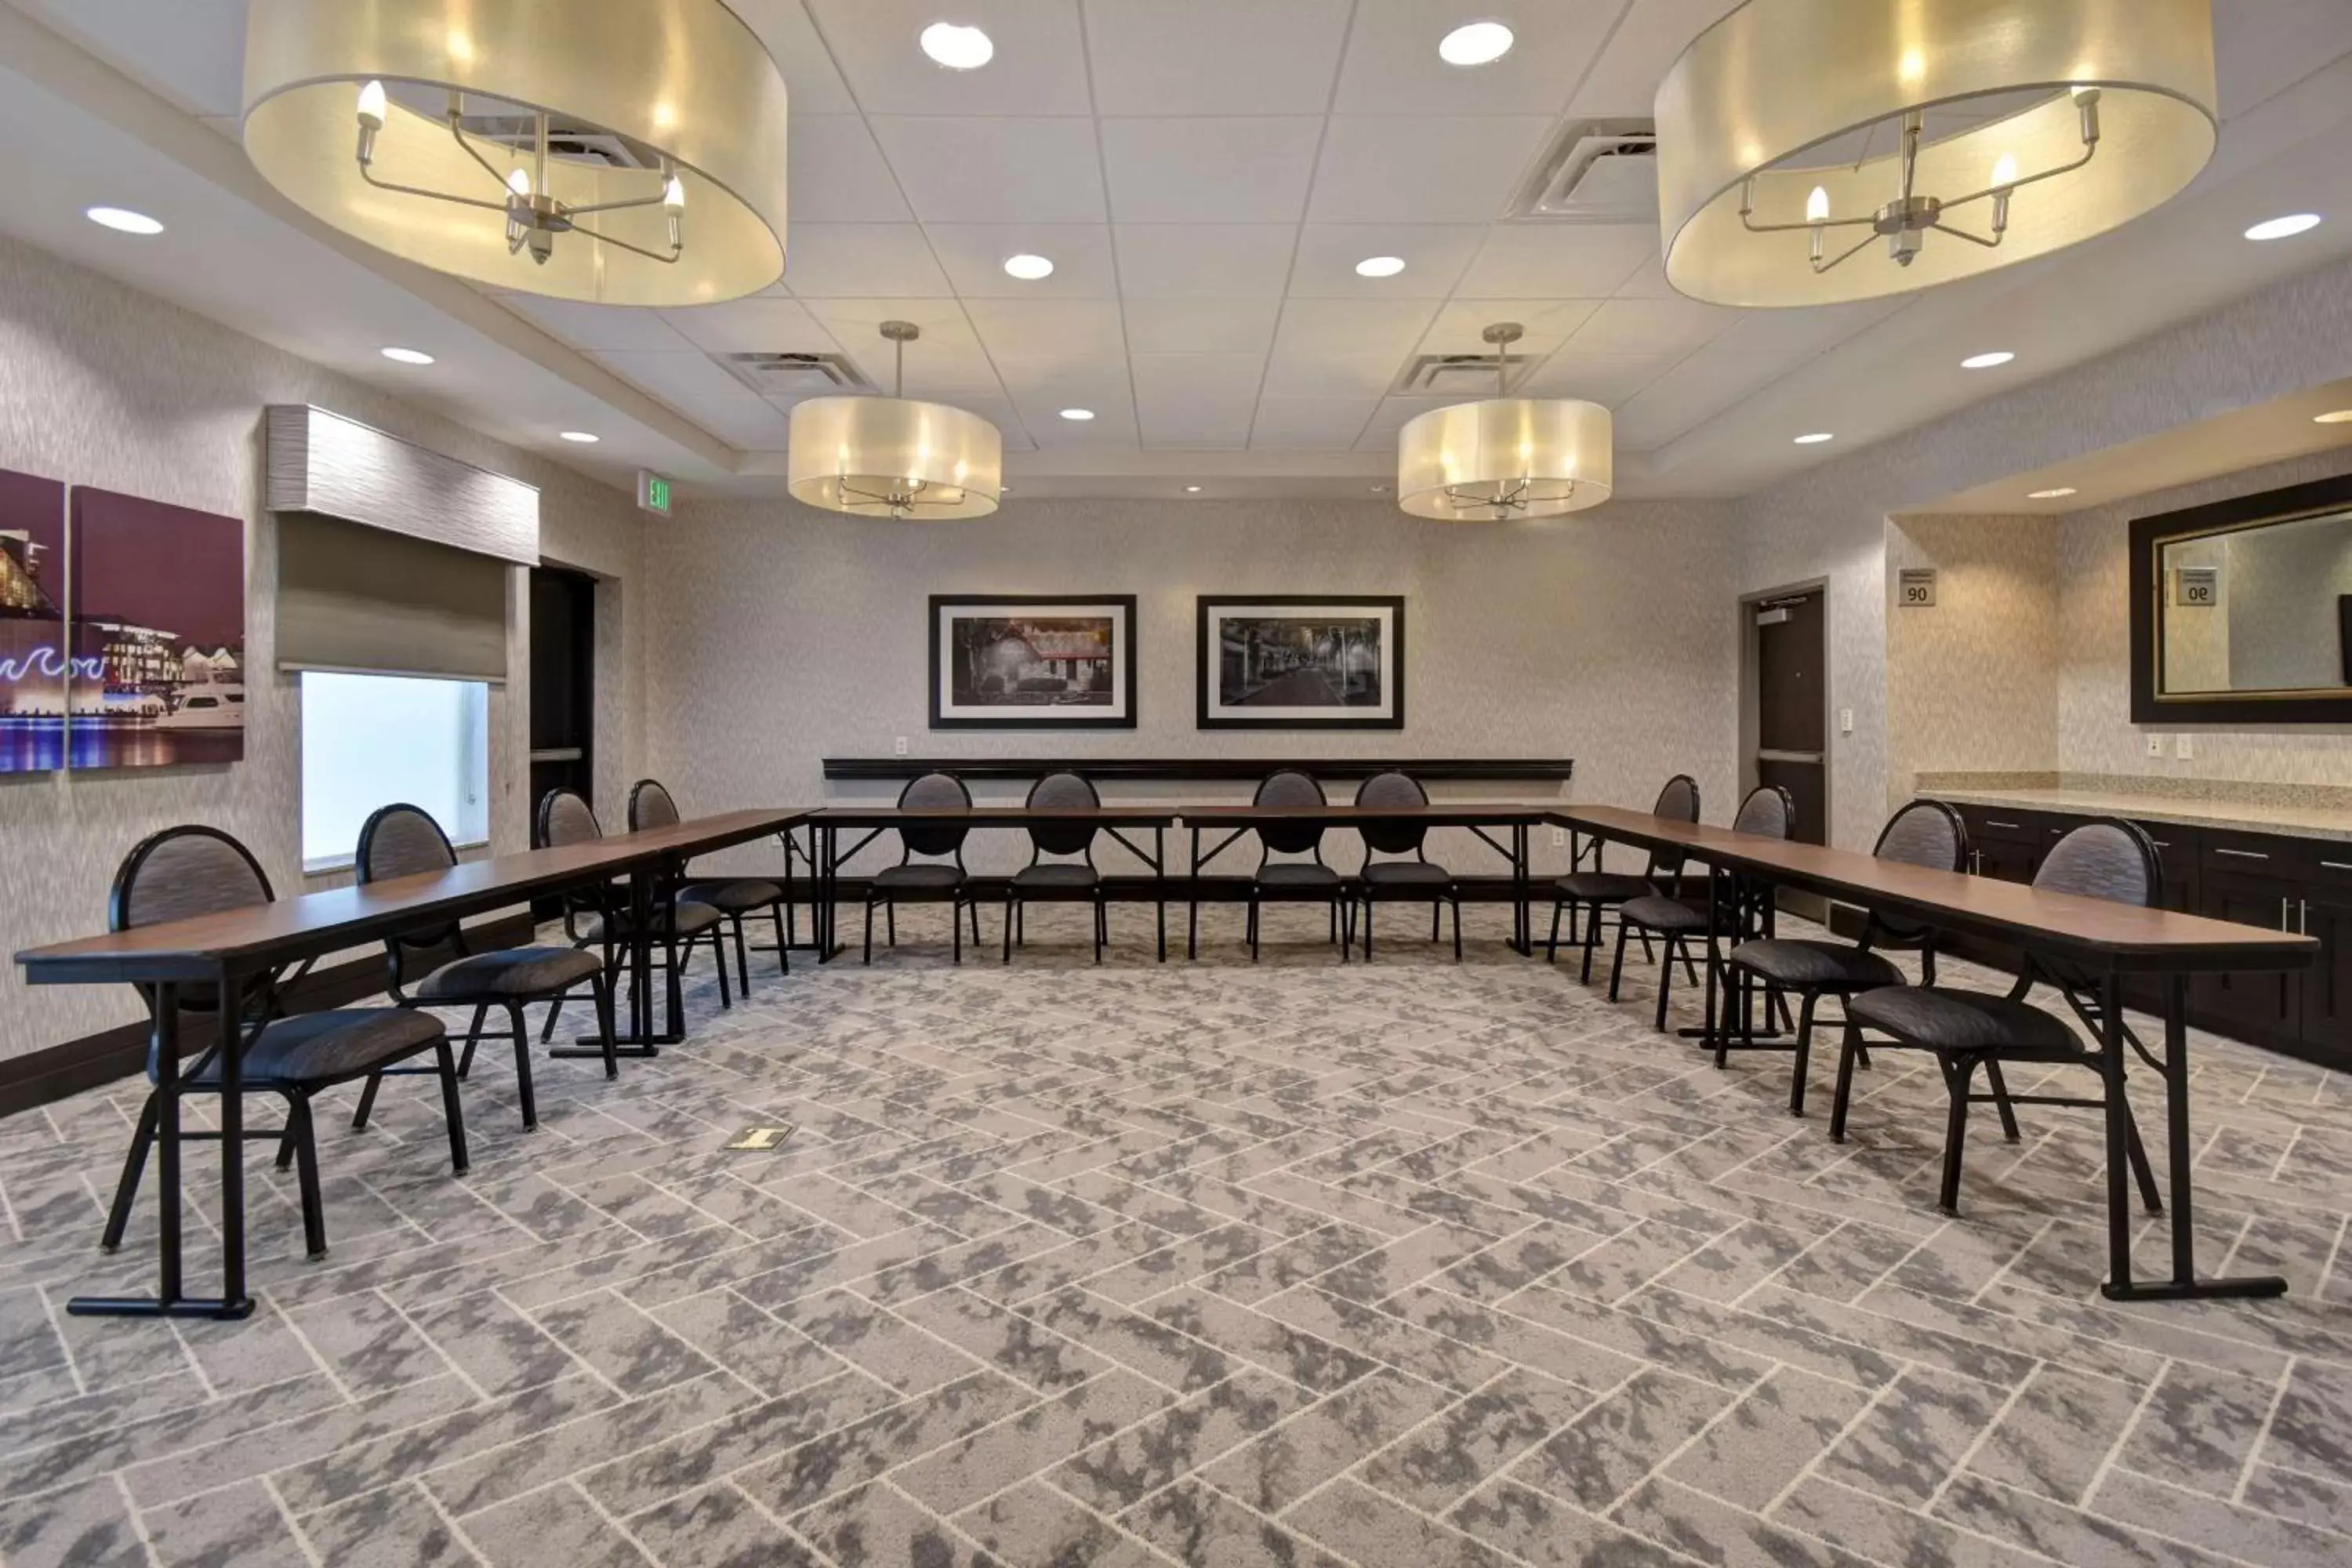 Meeting/conference room in Hampton Inn & Suites - Columbia South, MD